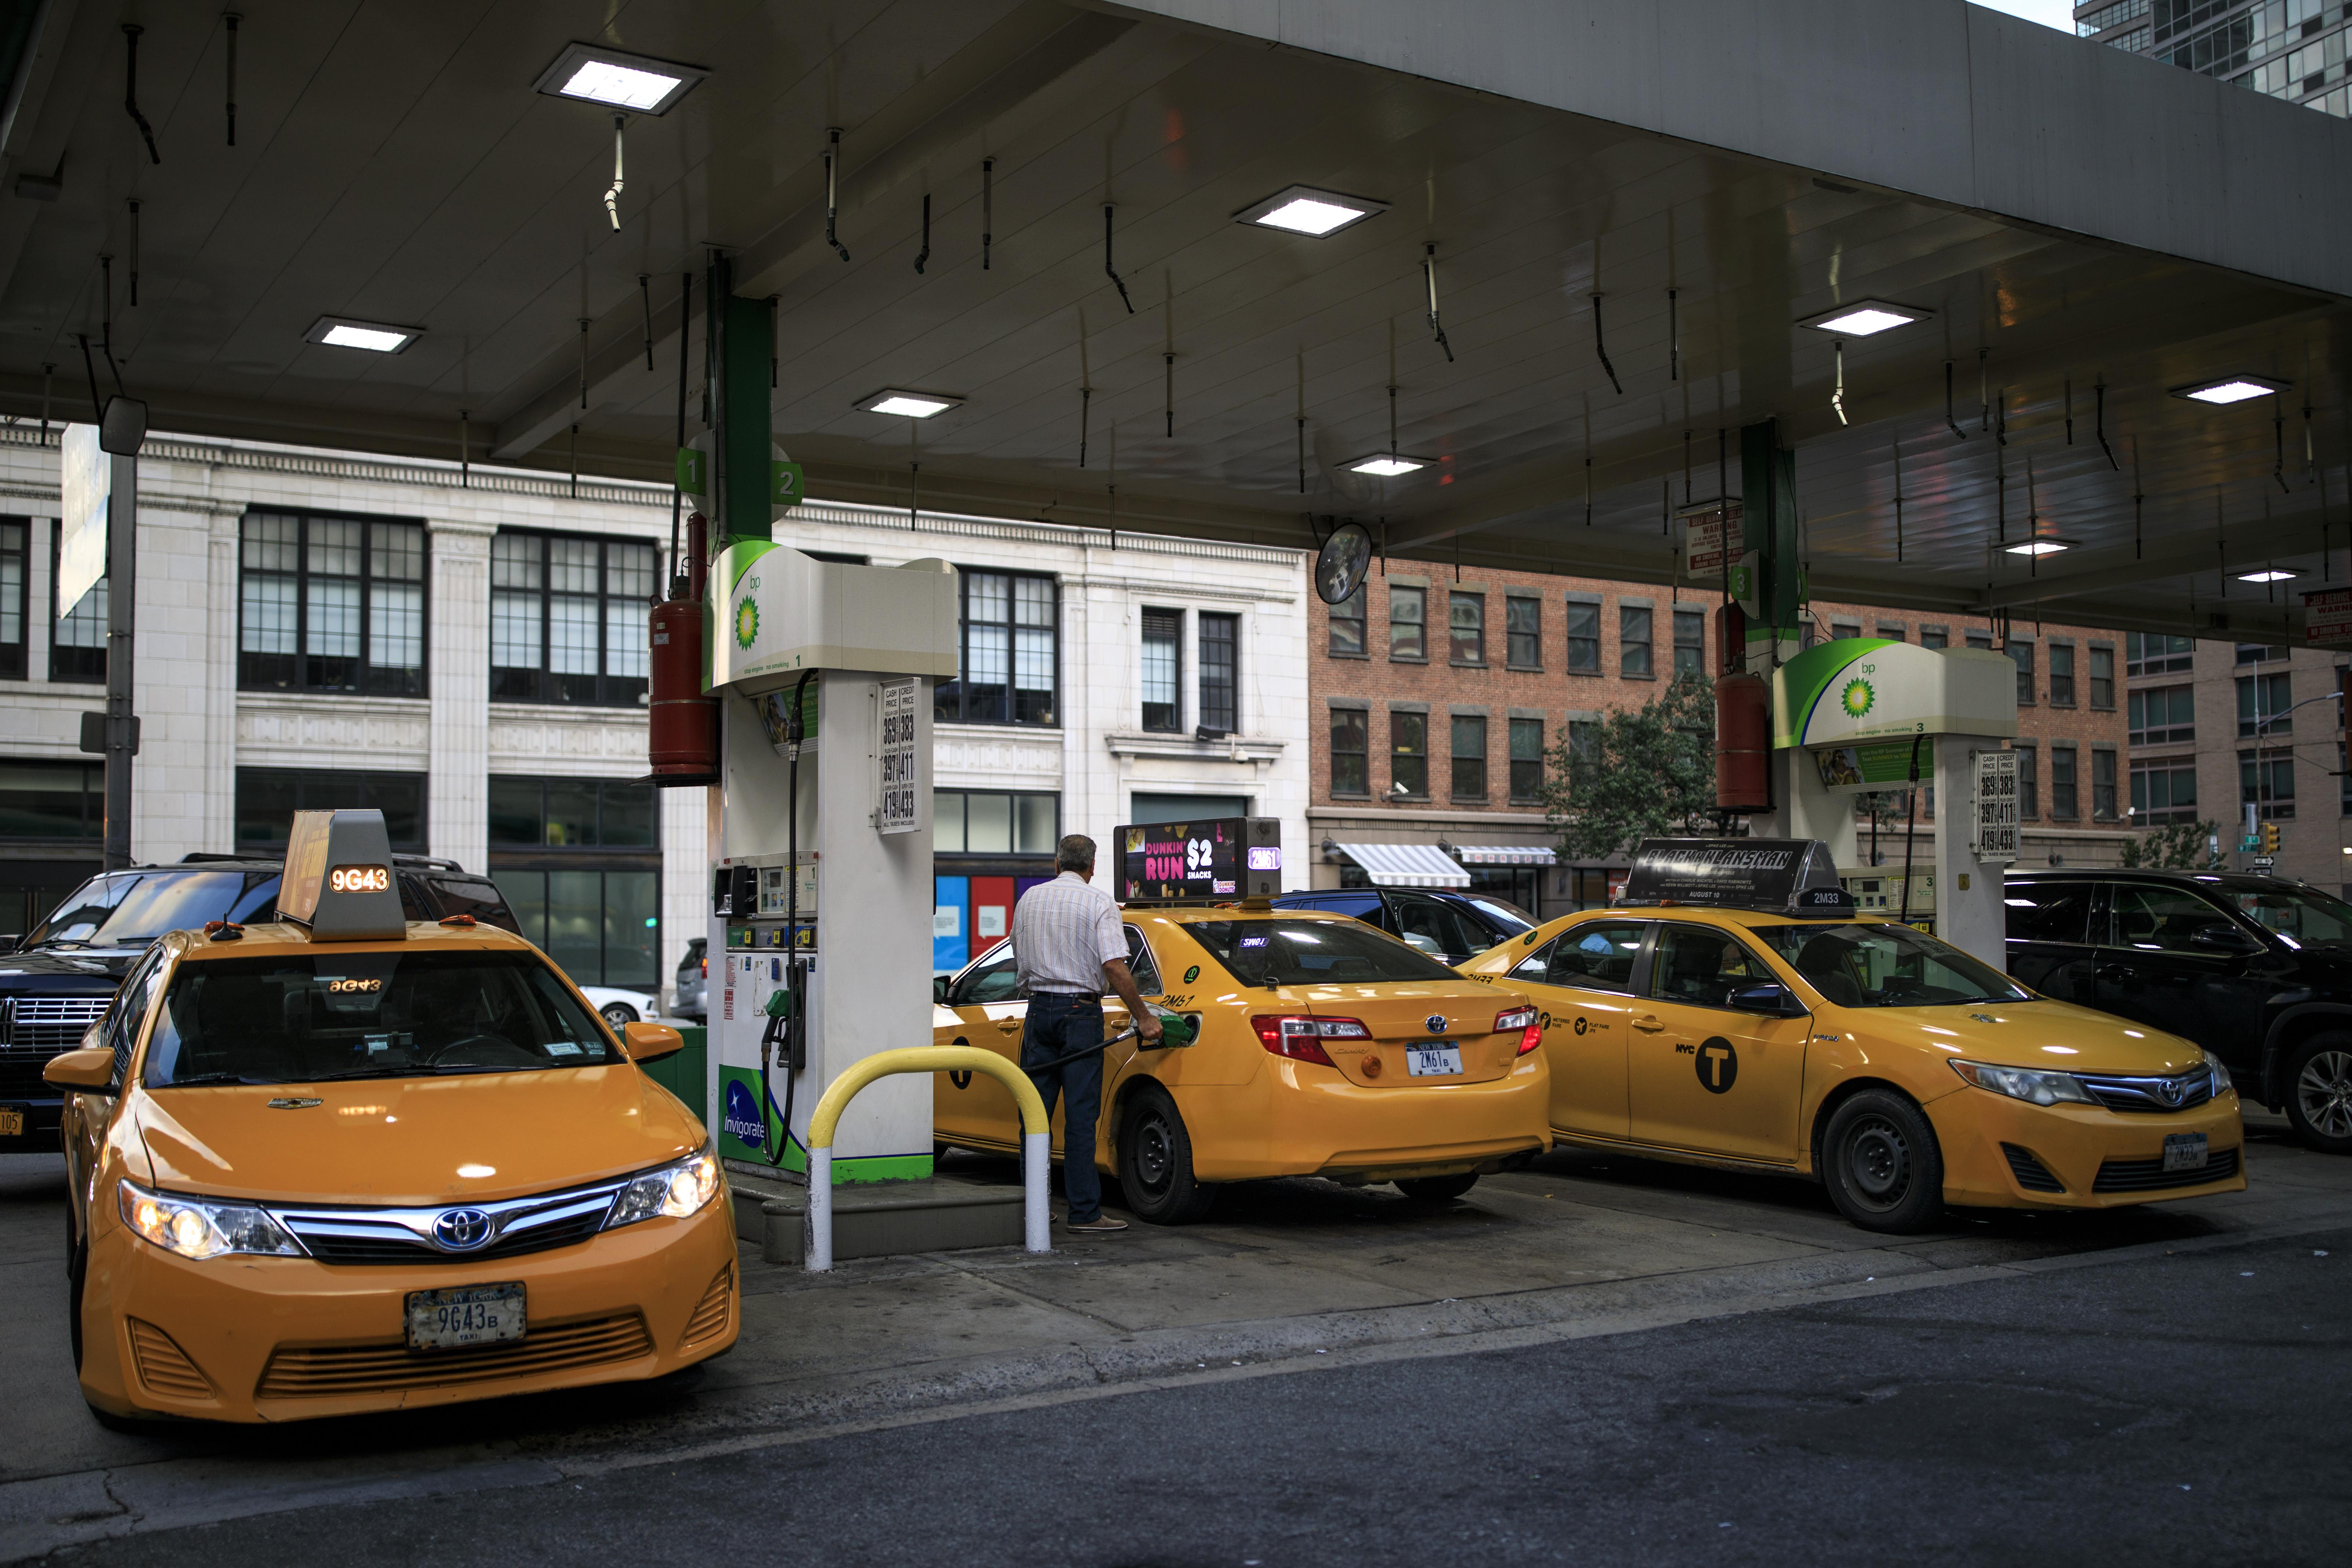 NEW YORK, NY - AUGUST 8: Taxi cabs fill up at a BP Gas station on the West Side of Manhattan, August 8, 2018 in New York City. On Wednesday, New York City became the first American city to halt new vehicles for ride-hail services. The legislation passed by the New York City Council will cap the number of for-hire vehicles for one year while the city studies the industry. The move marks a setback for Uber in its largest U.S. market. (Photo by Drew Angerer/Getty Images)